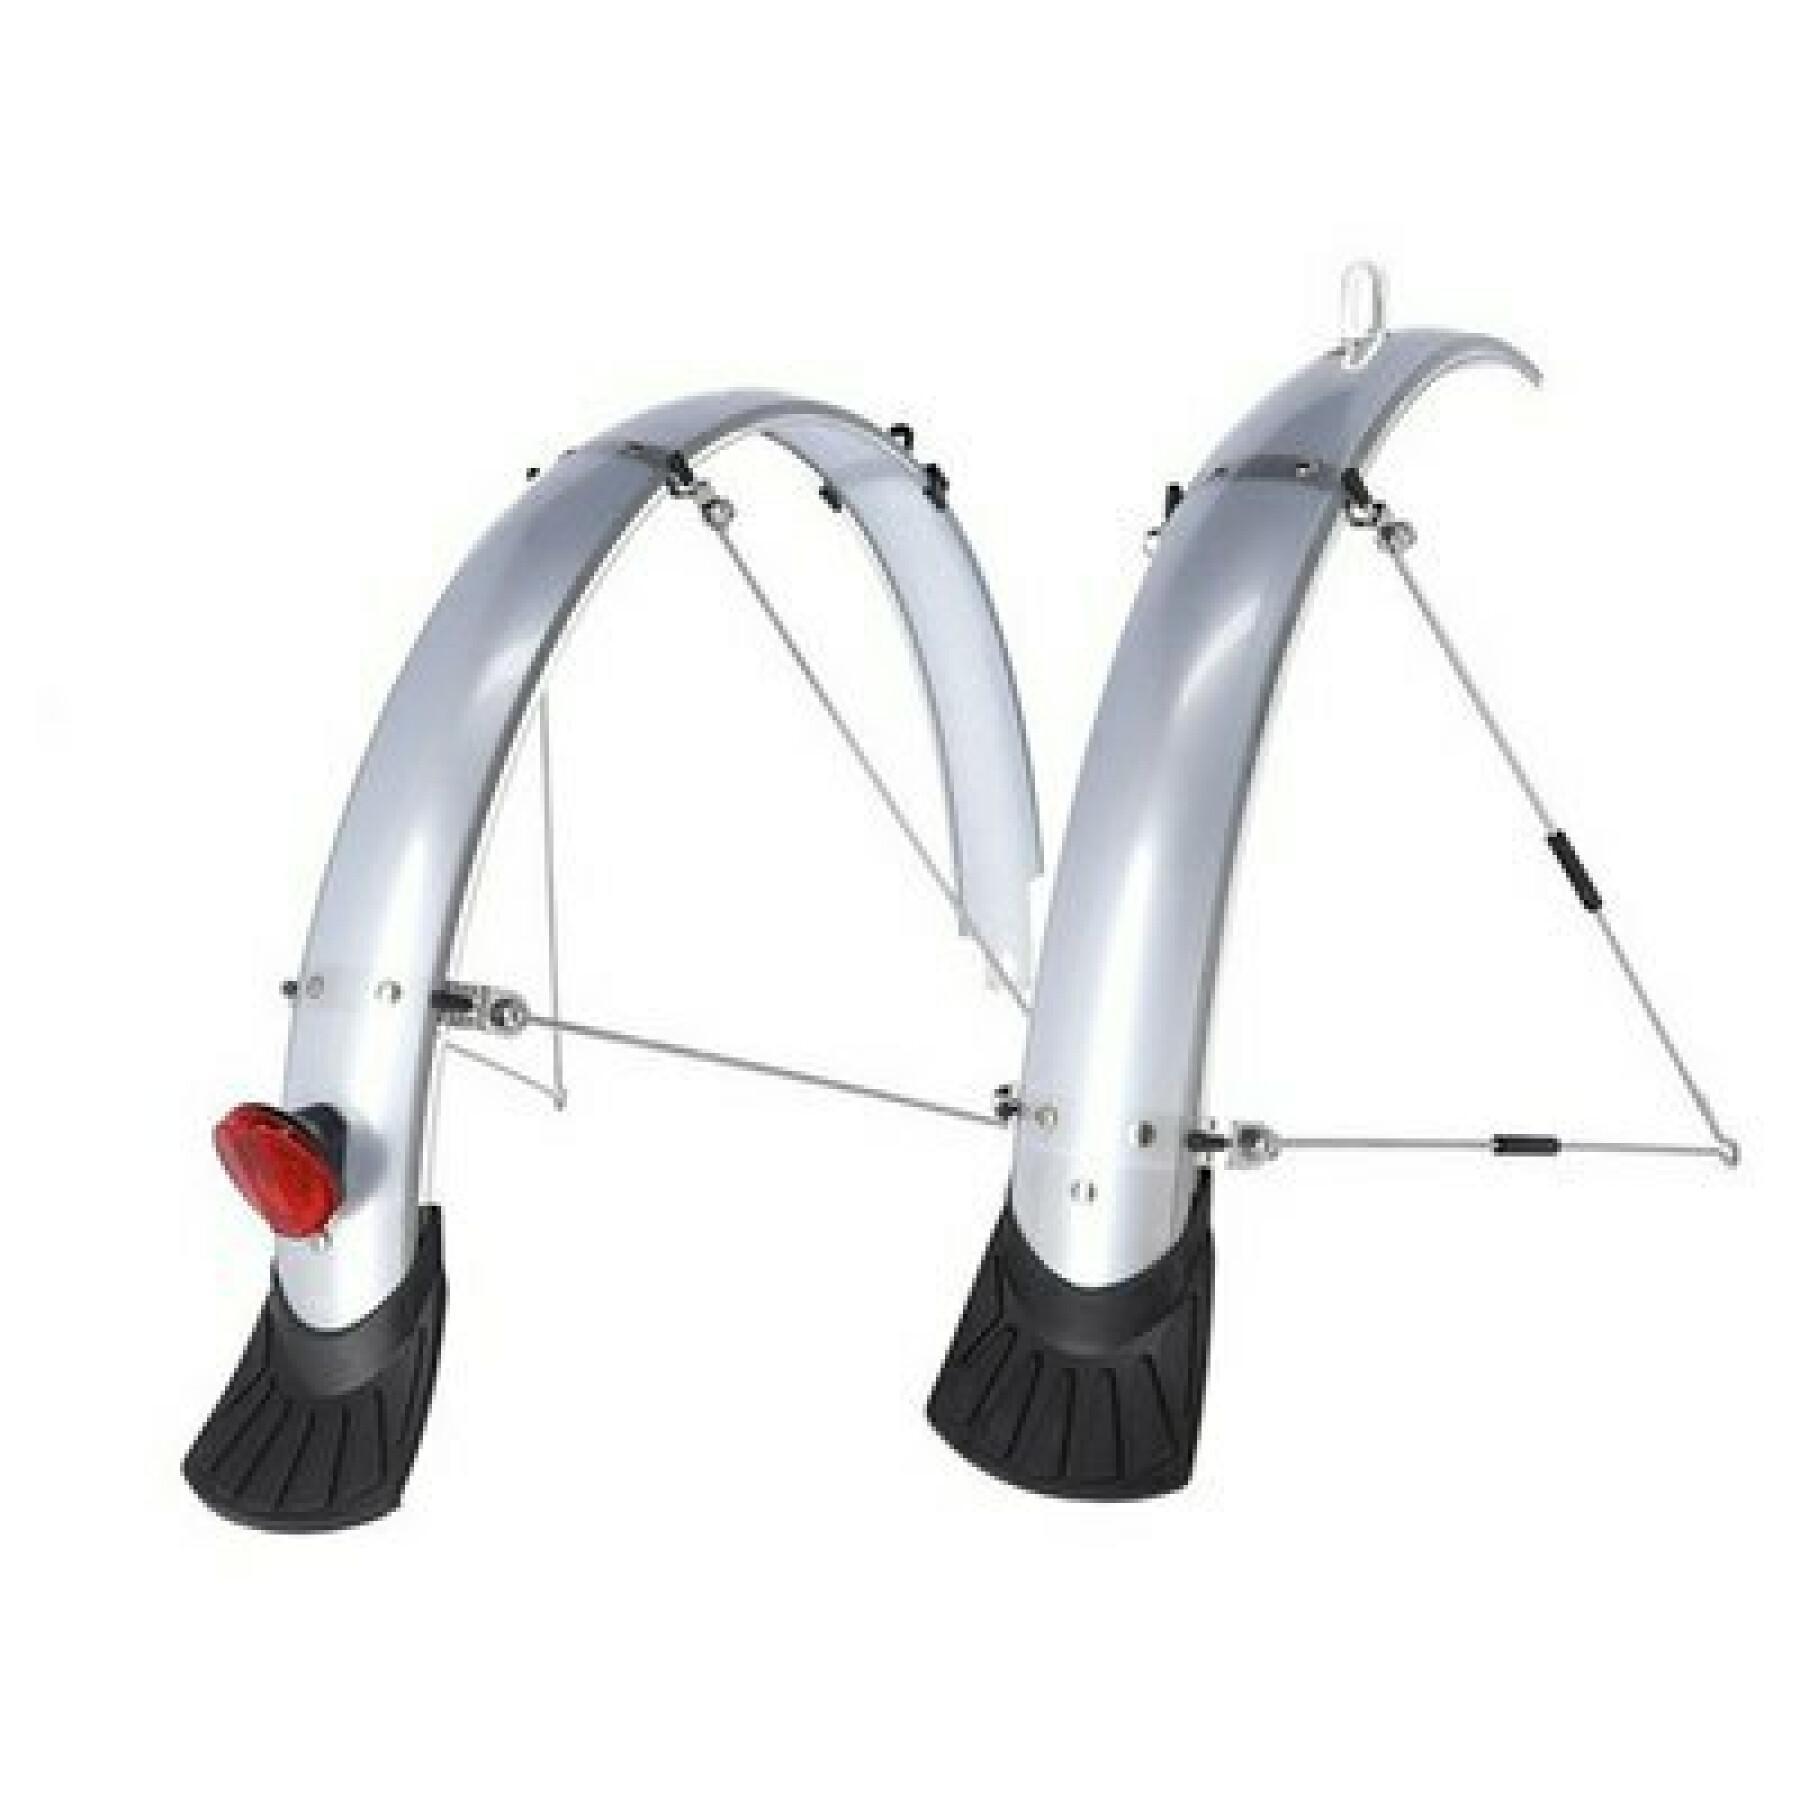 Set of reflective mudguards with fixing kit included XLC Mg-f02 26"